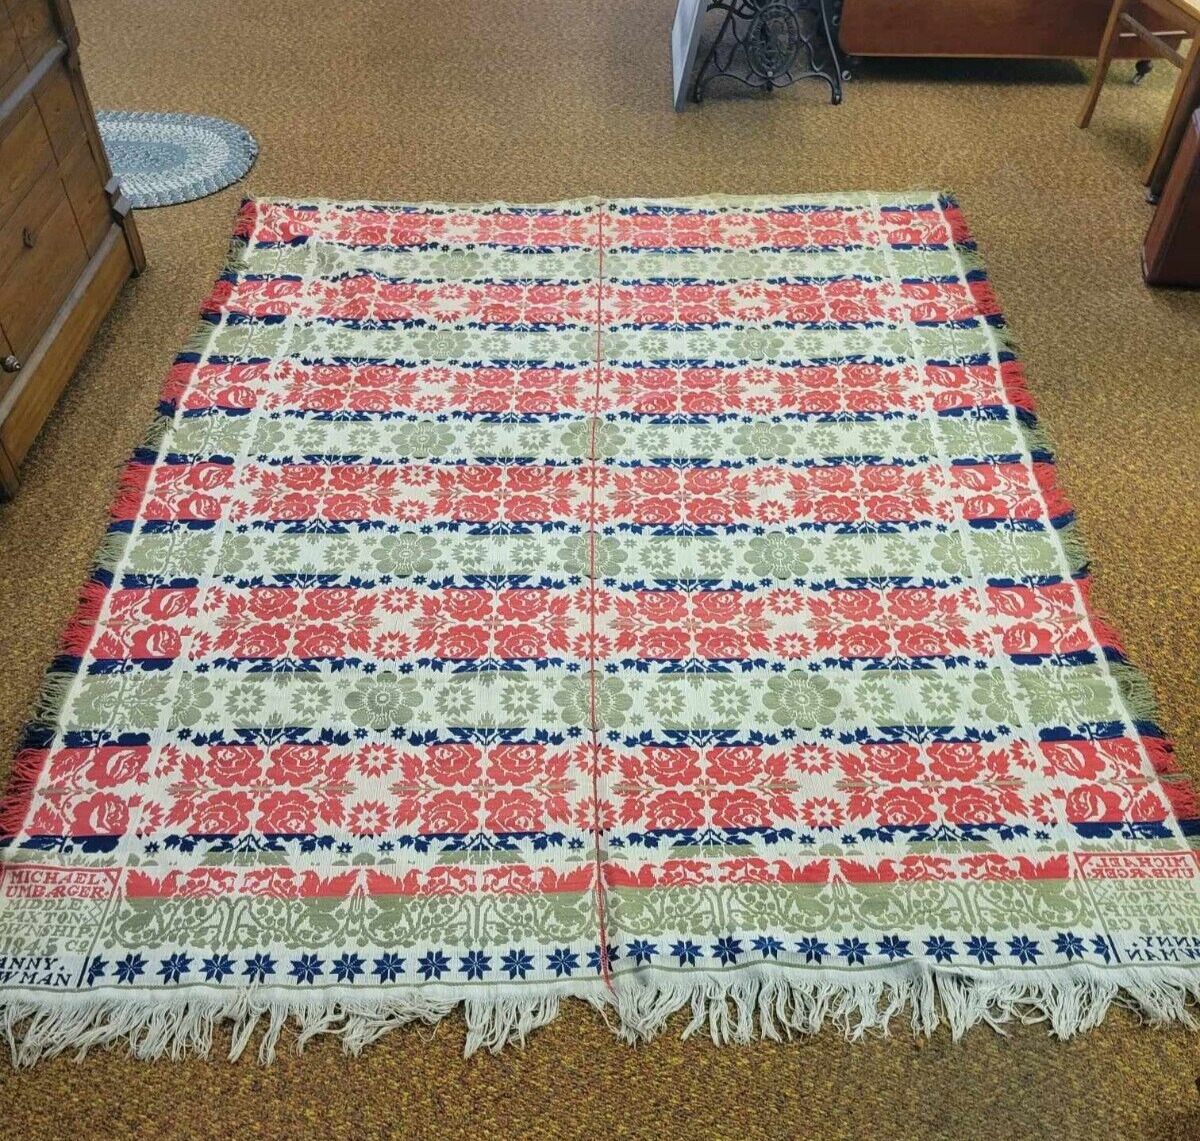 1845 JAQUARD WOVEN COVERLET 4 COLOR SIGNED M UMBARGER MIDDLE PAXTON TOWNSHIP PA